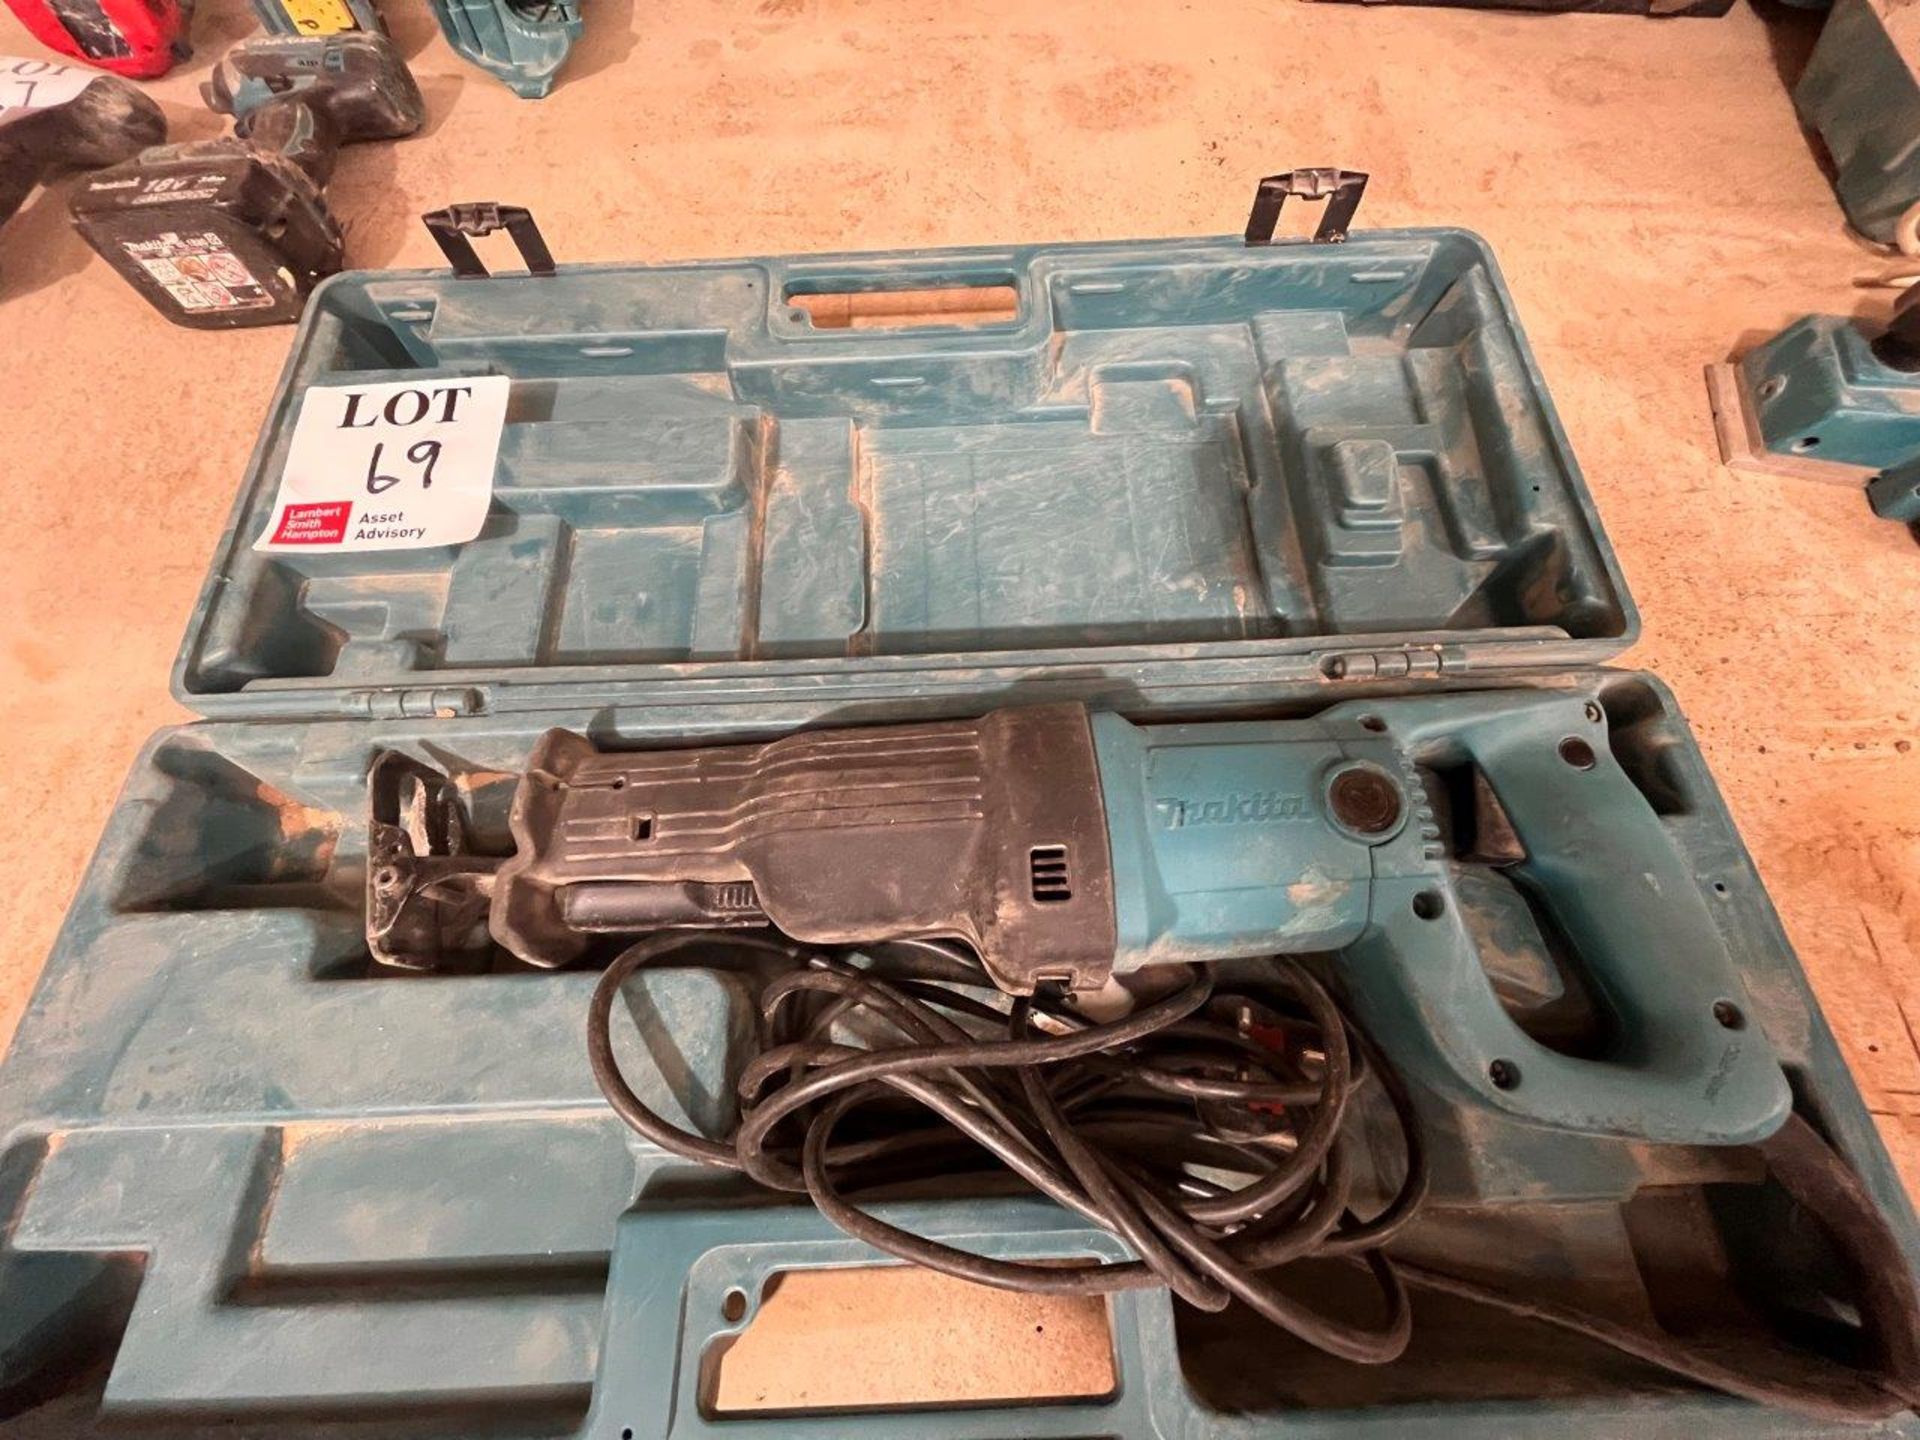 Makita JR3030T reciprocating saw, 240 volt, with carry case